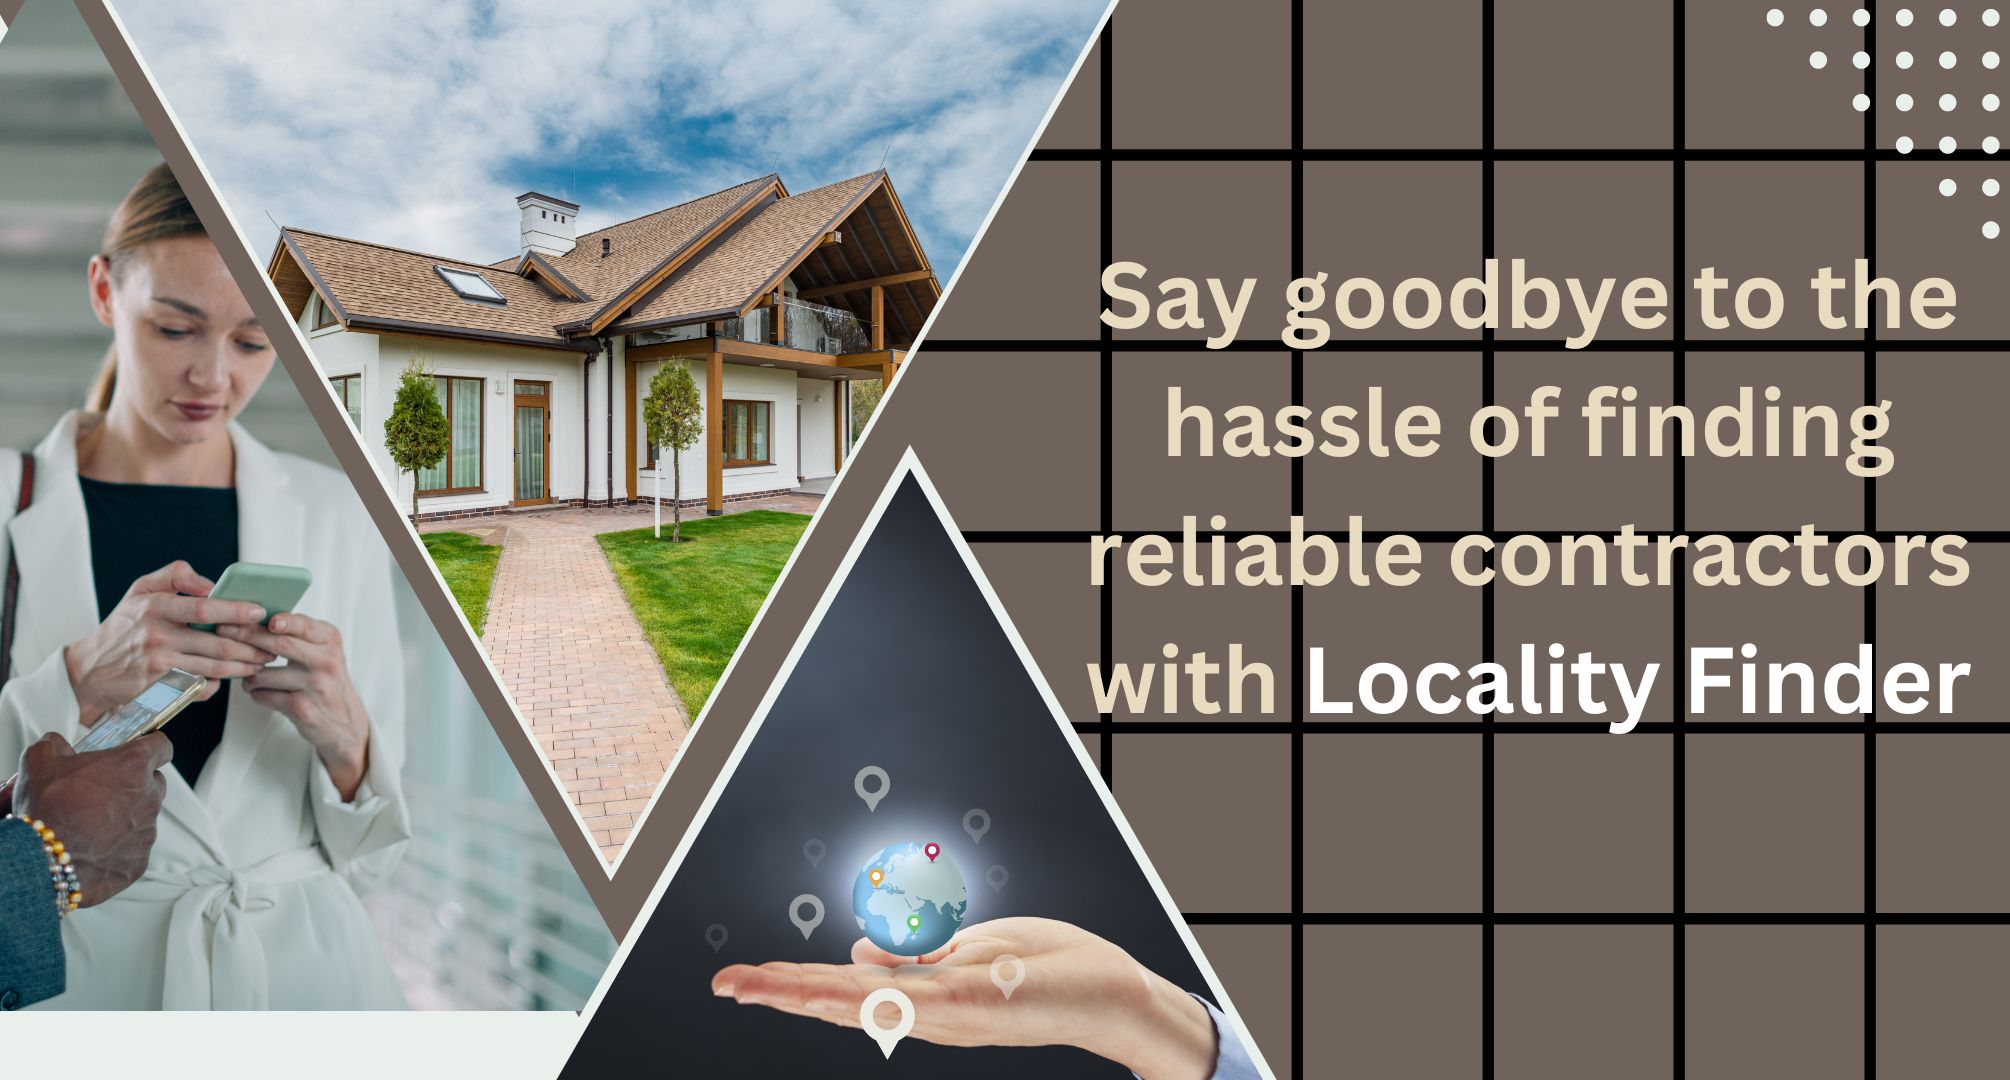 Experience Hassle-Free Home Improvement and Repairs with the Help of Locality Finder